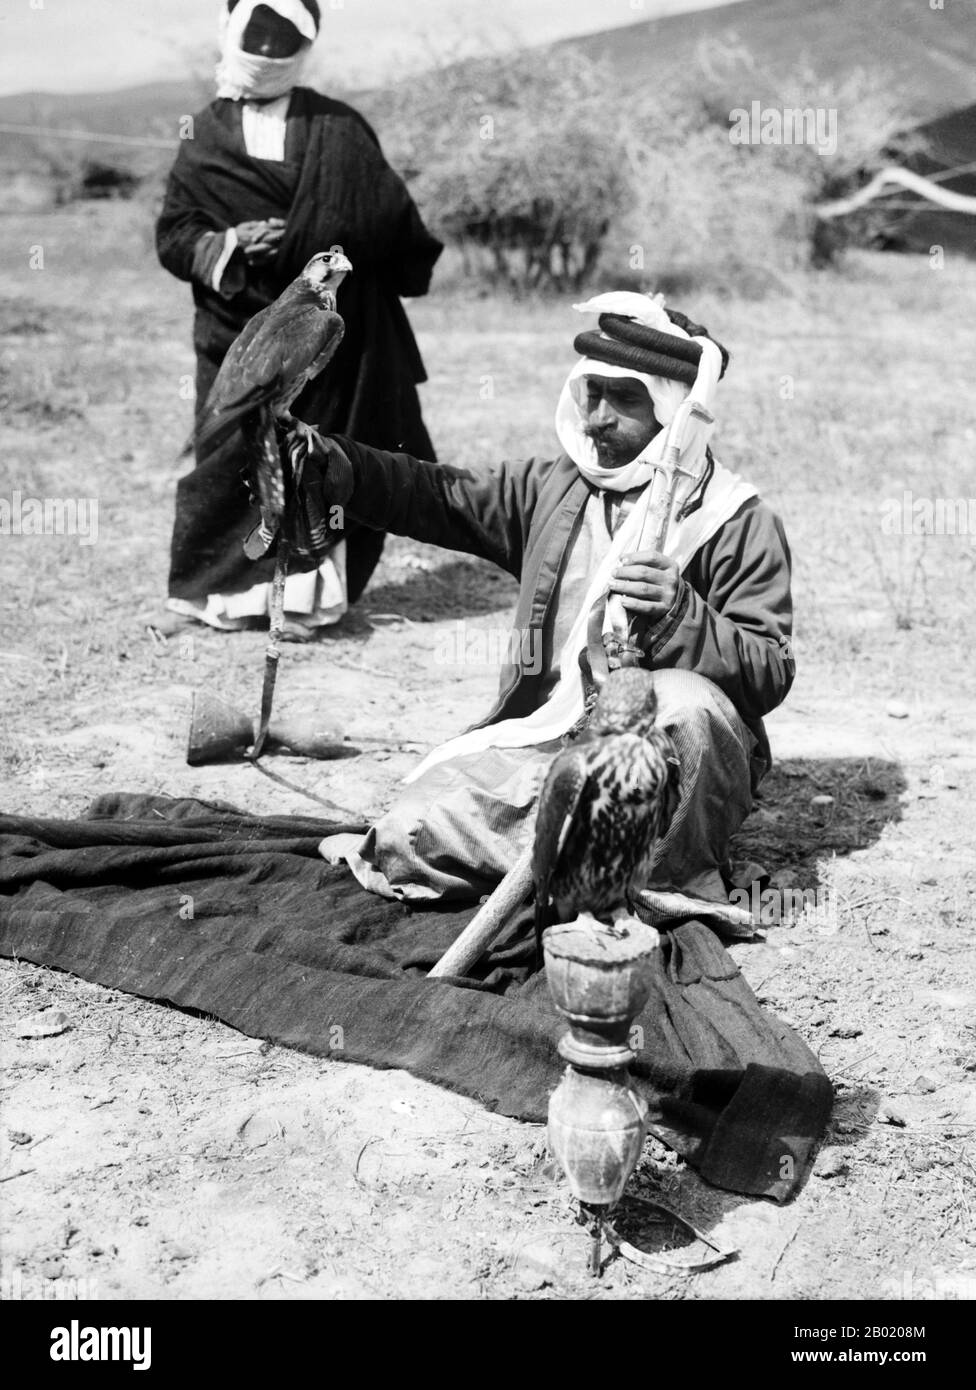 Bedouin (from the Arabic badawī بَدَوِي, pl. badw بَدْو or badawiyyūn بَدَوِيُّون) are a part of a predominantly desert-dwelling Arabian ethnic group traditionally divided into tribes, or clans, known in Arabic as ʿašāʾir (عَشَائِر).The term 'Bedouin' derives from a plural form of the Arabic word badawī, as it is pronounced in colloquial dialects. The Arabic term badawī (بدوي) derives from the word bādiyah (بَادِية), which means semiarid desert (as opposed to ṣaḥarāʾ صَحَرَاء, which means desert).  Starting in the late nineteenth century, many Bedouin under British rule began to transit to a s Stock Photo